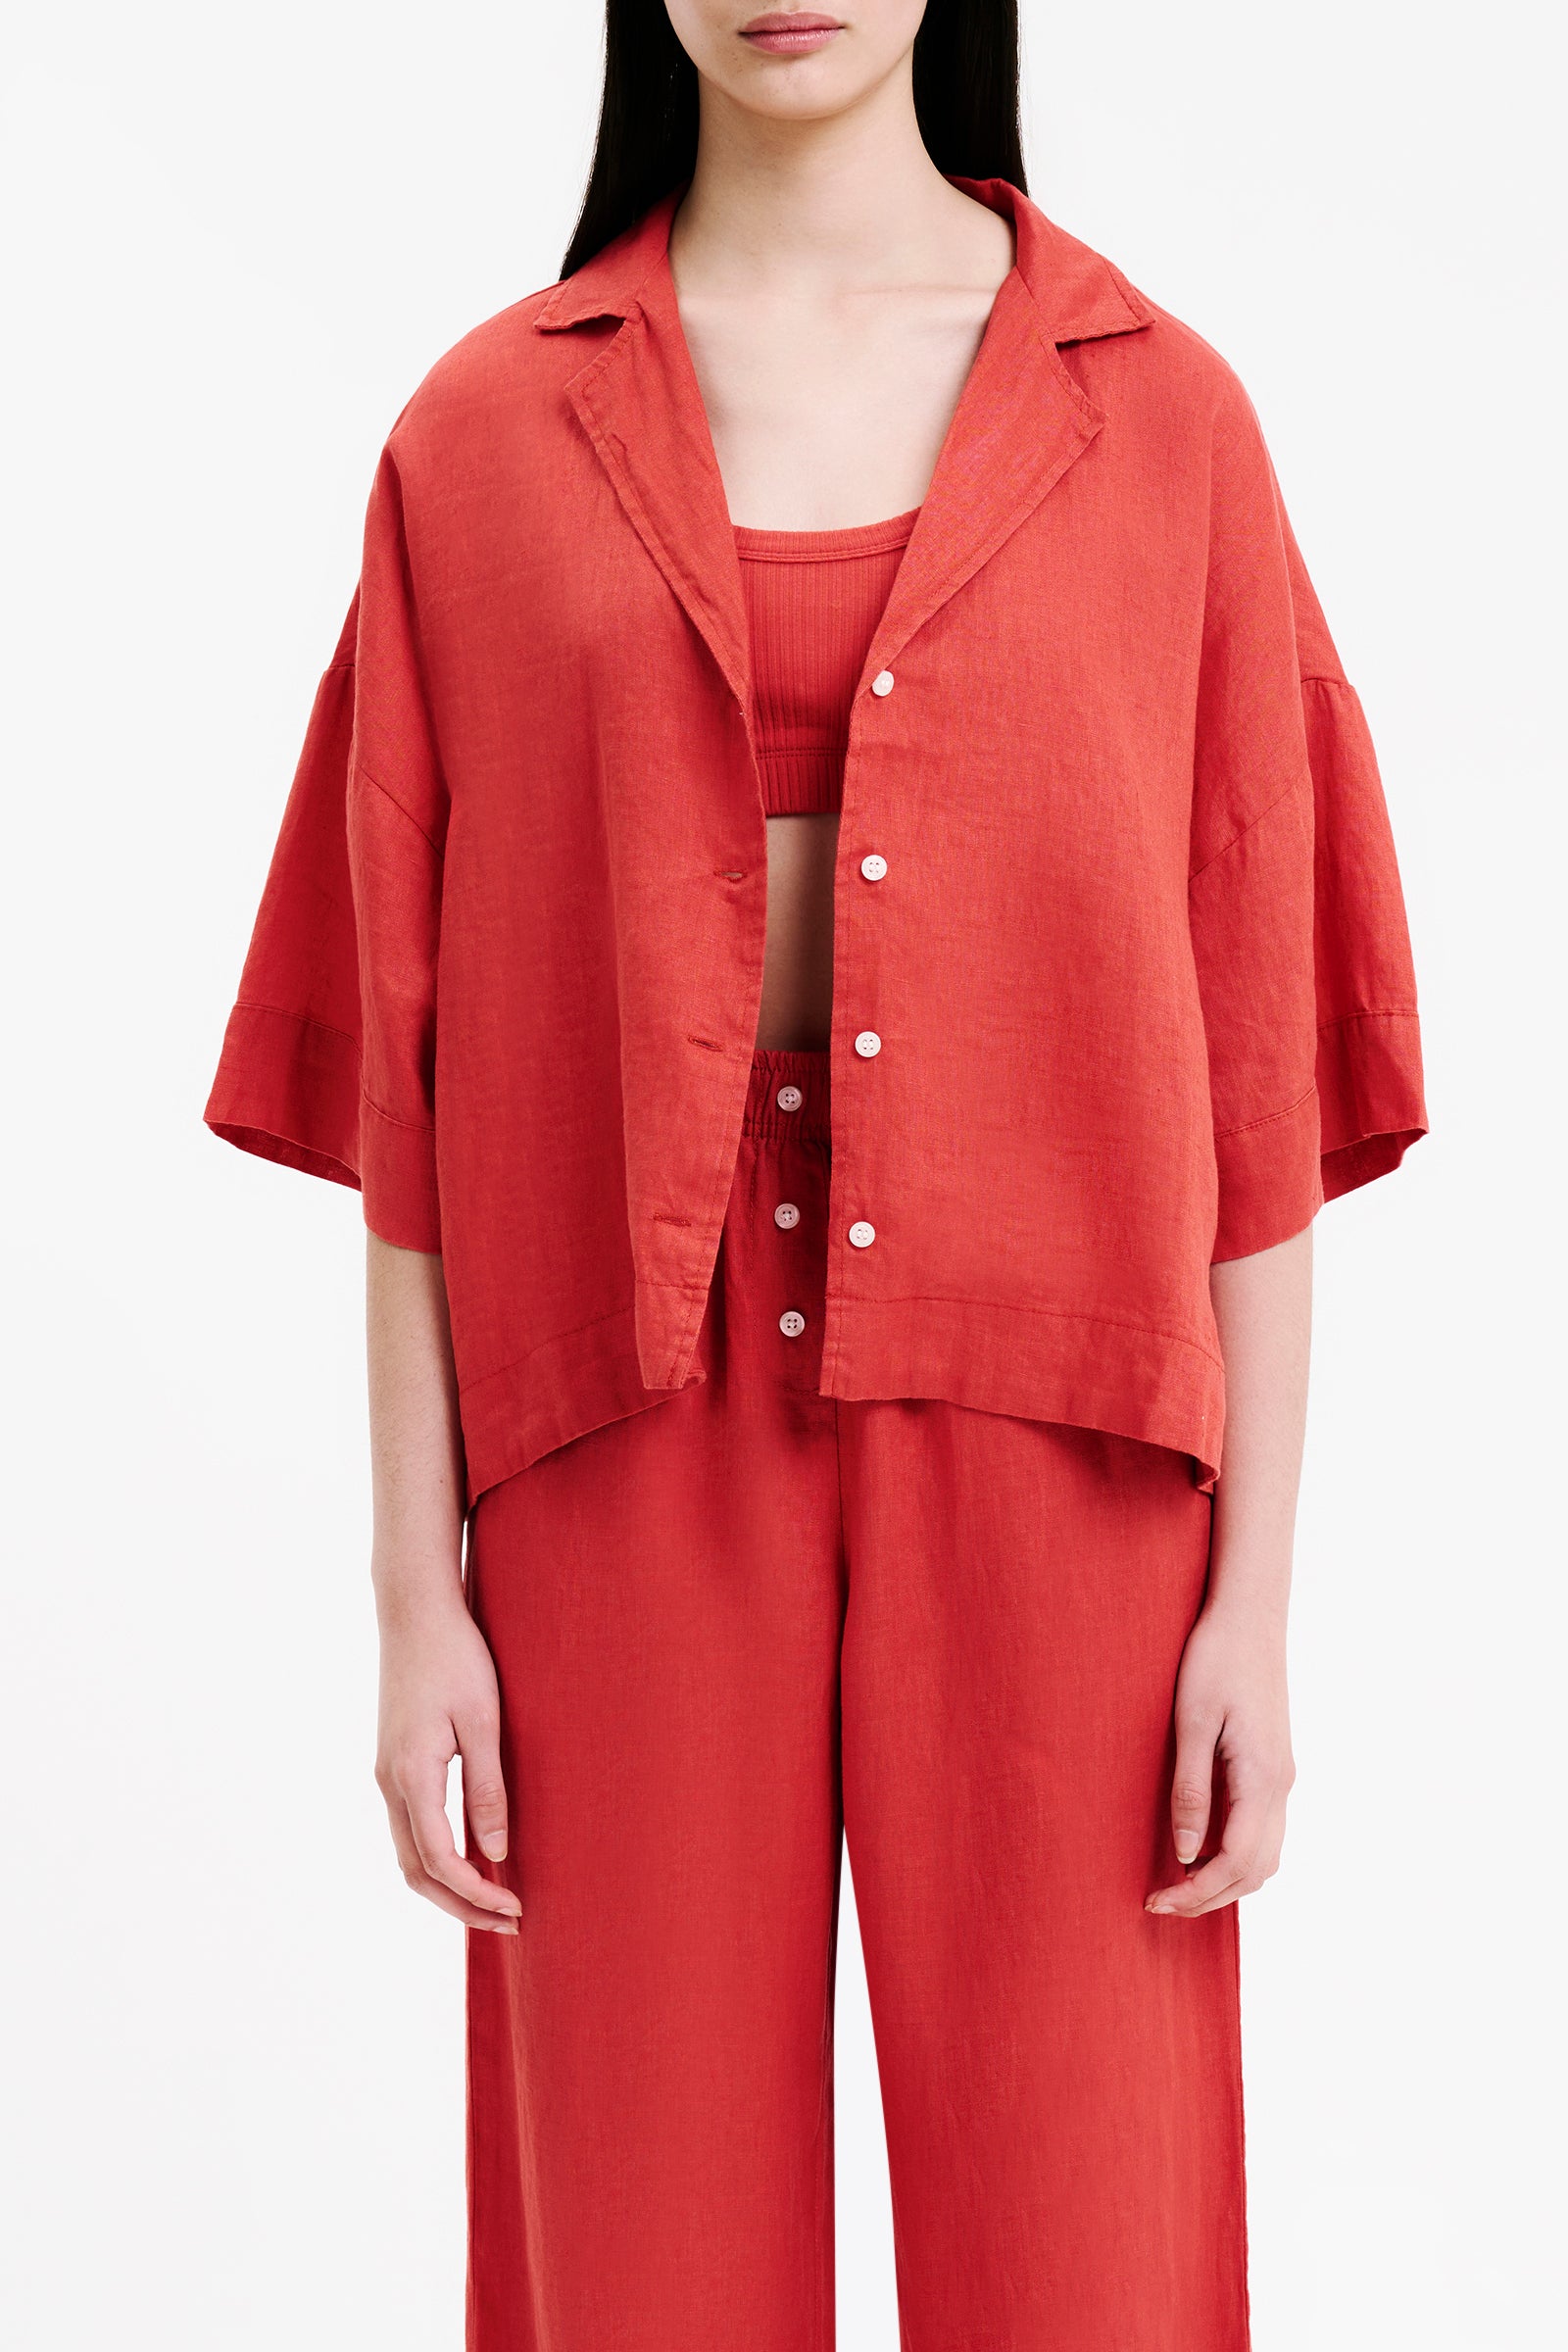 Nude Lucy Lounge Linen Shirt In A Pink & Orange Toned Coral Colour 